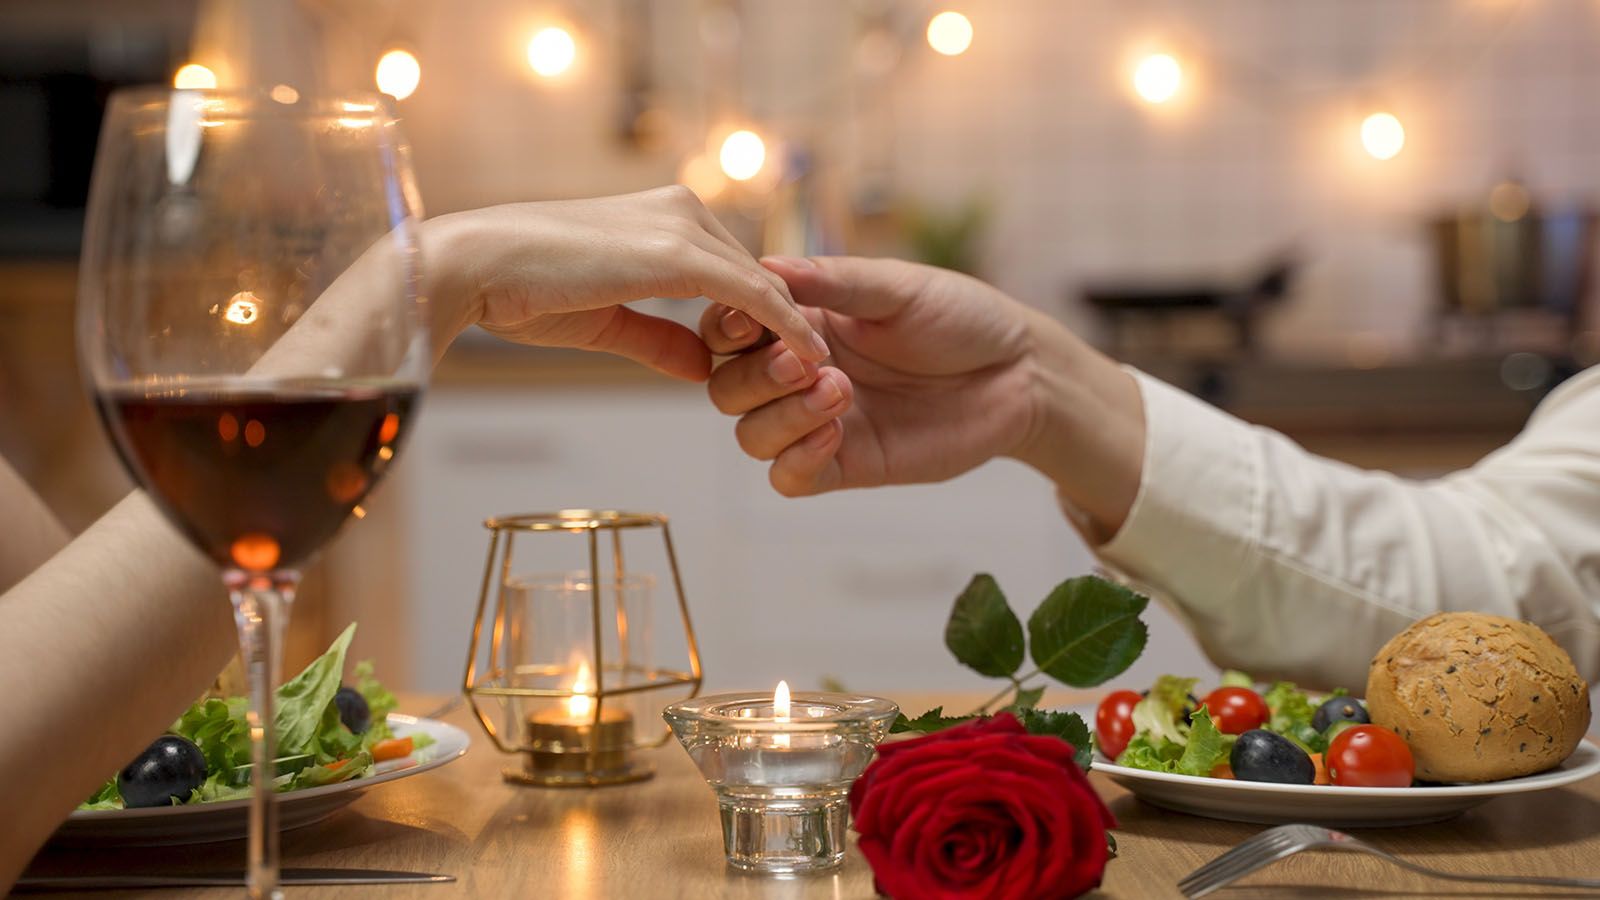 Now is the time to make those Valentine's Day dinner plans.